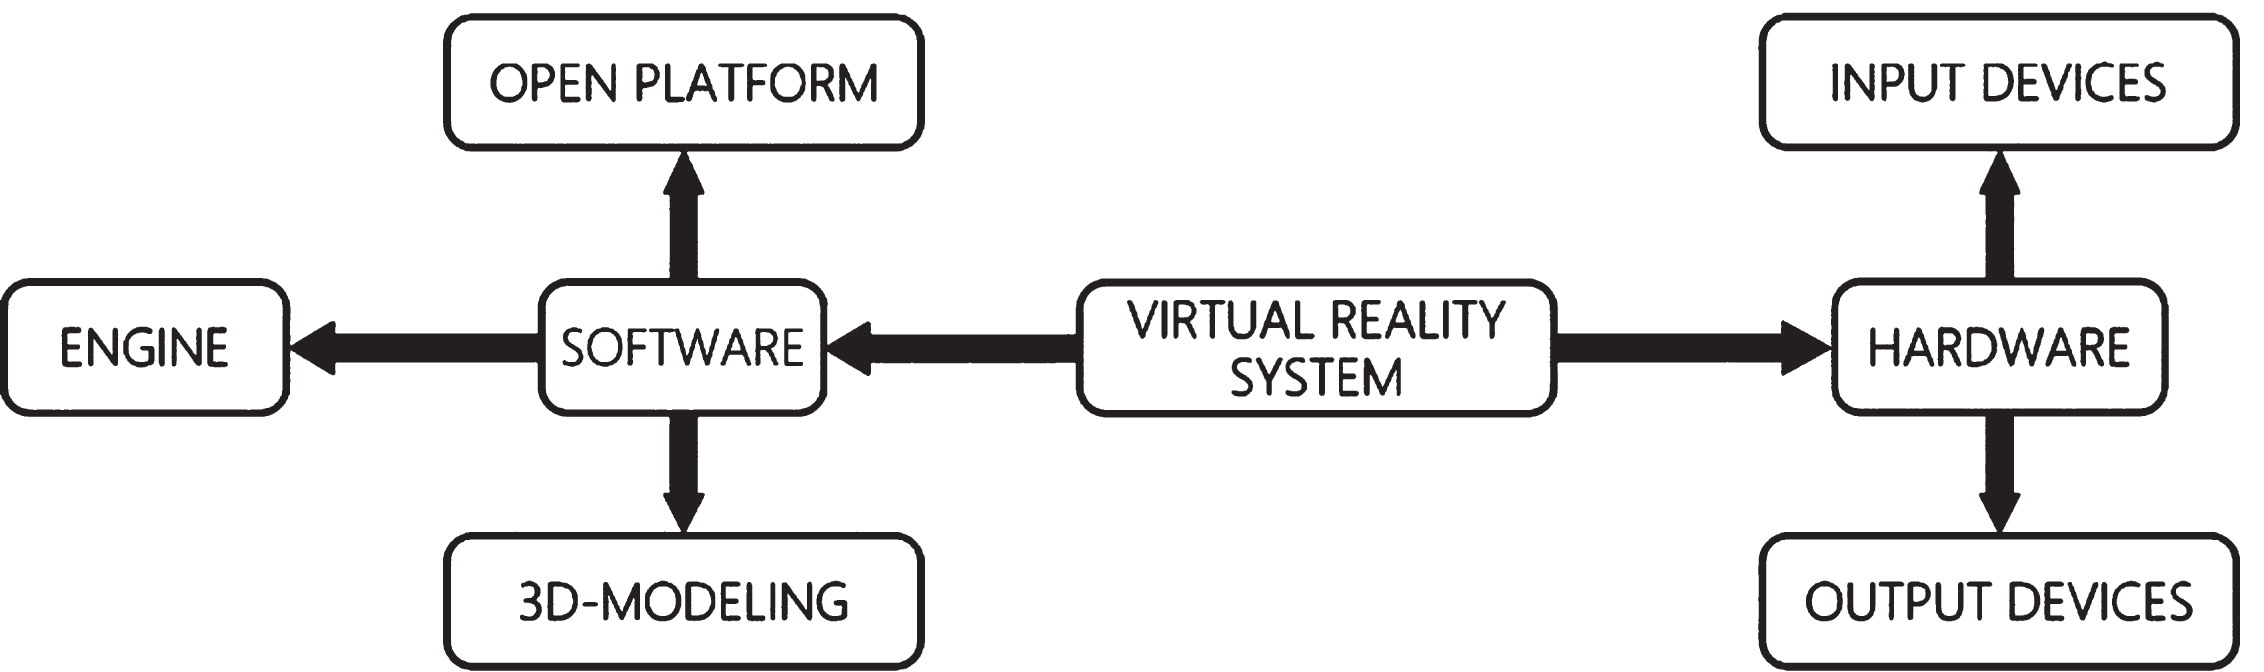 Classification of virtual reality systems.